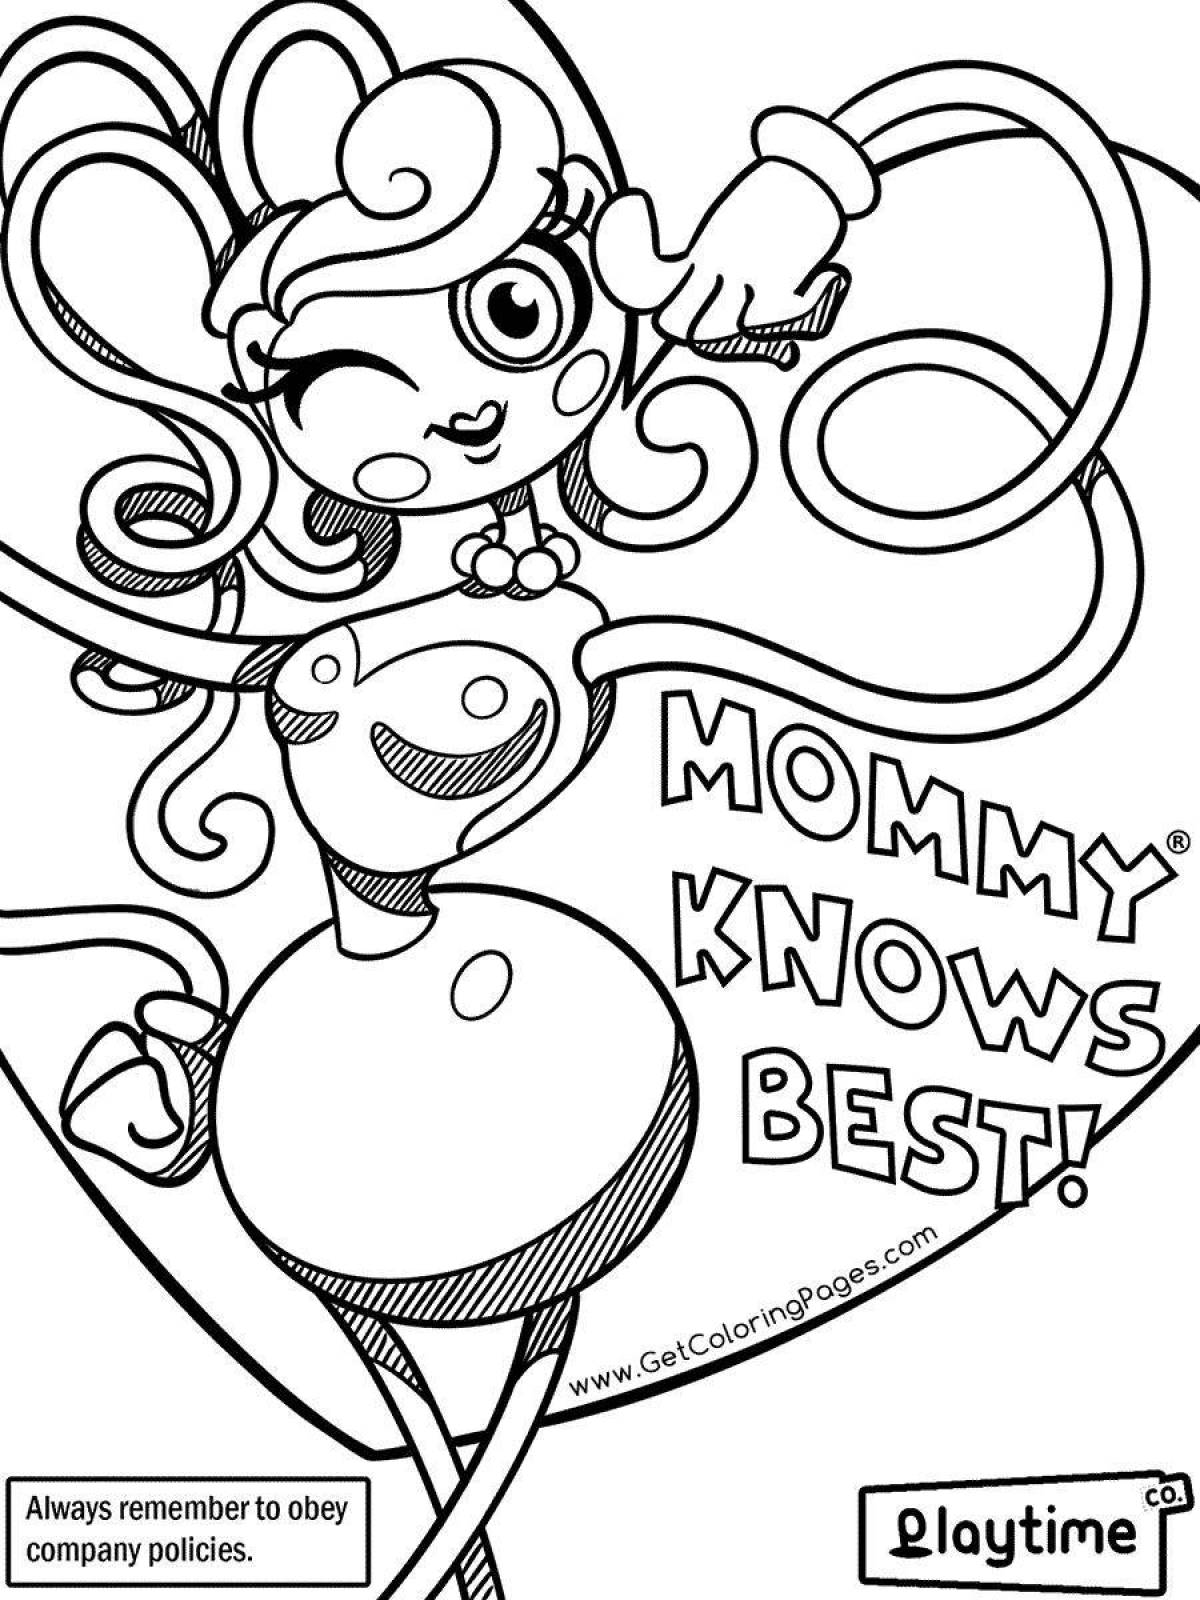 Fun game drink coloring page